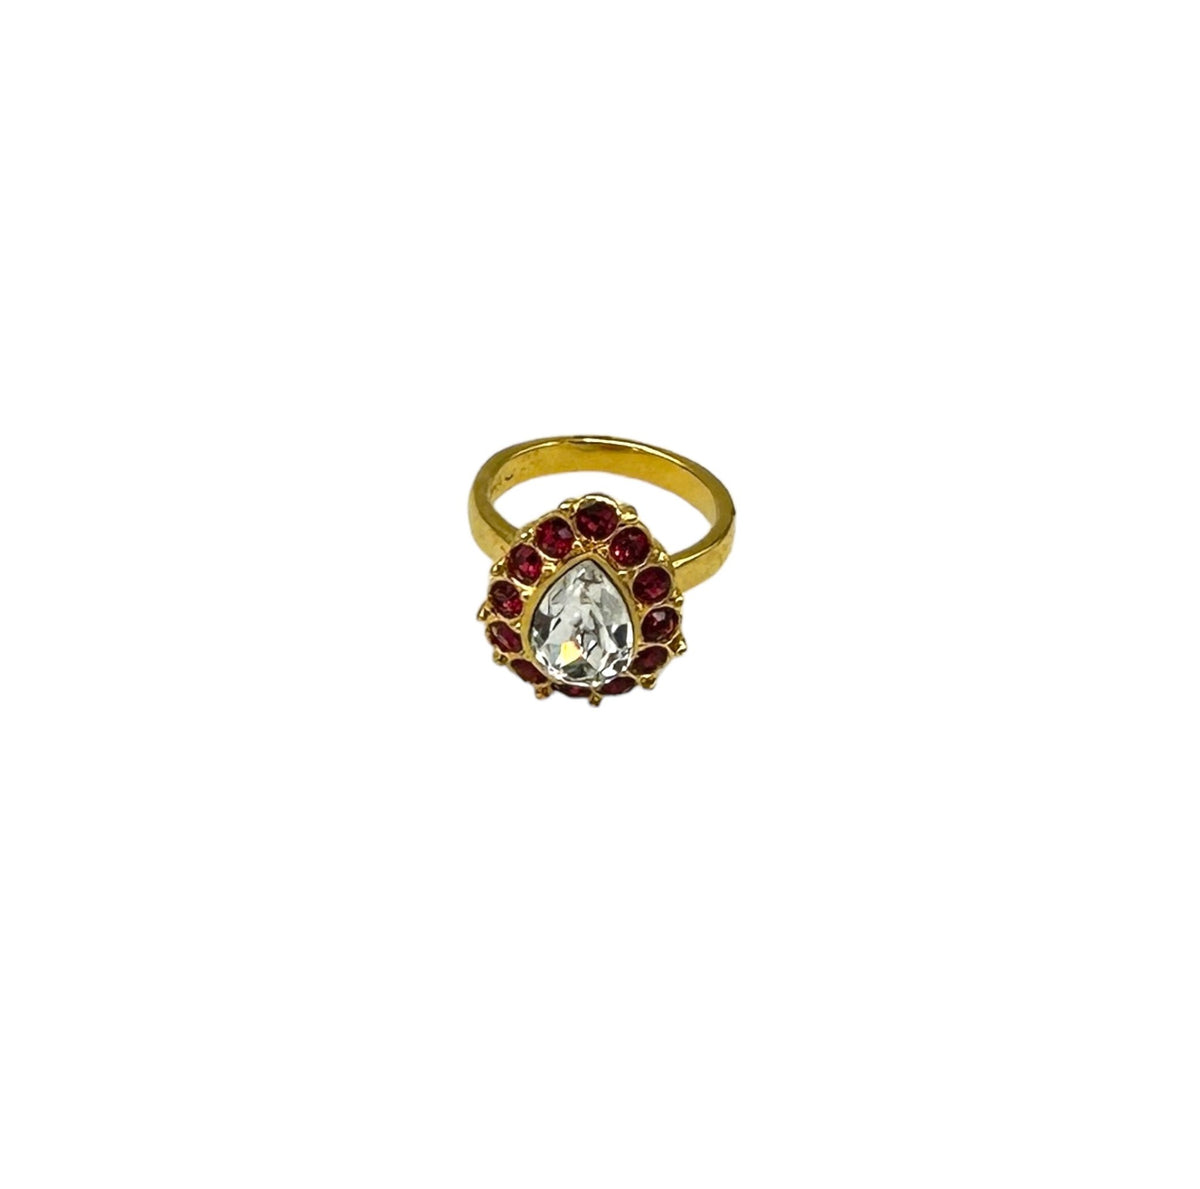 Monet Ruby Red Halo Vintage Cocktail Ring - 24 Wishes Vintage Jewelry